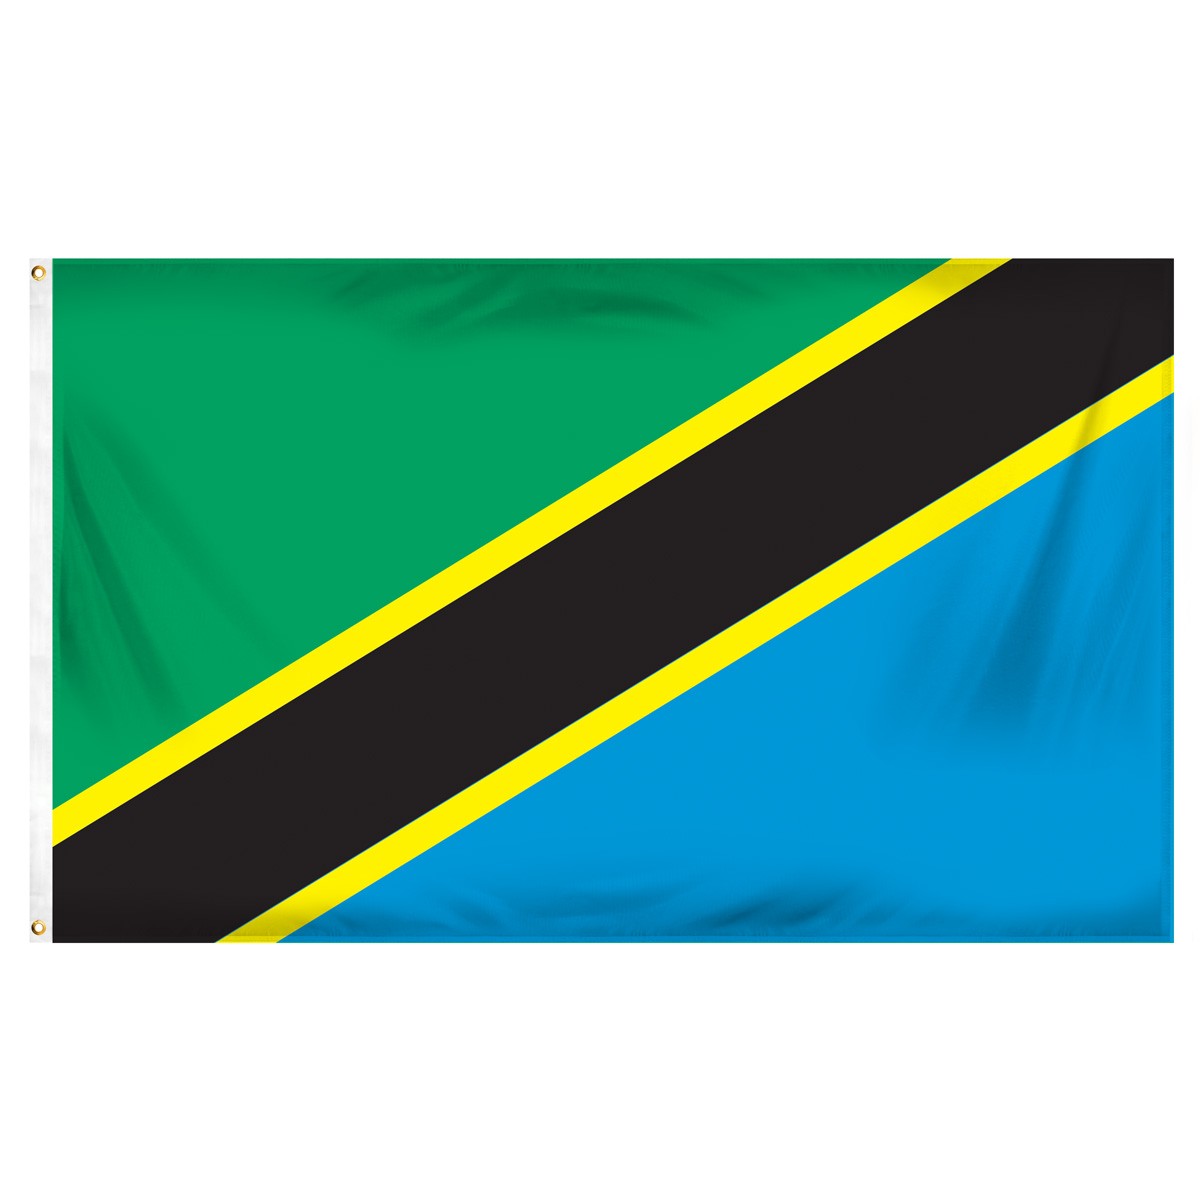 Tanzania Building Pennants and Flags